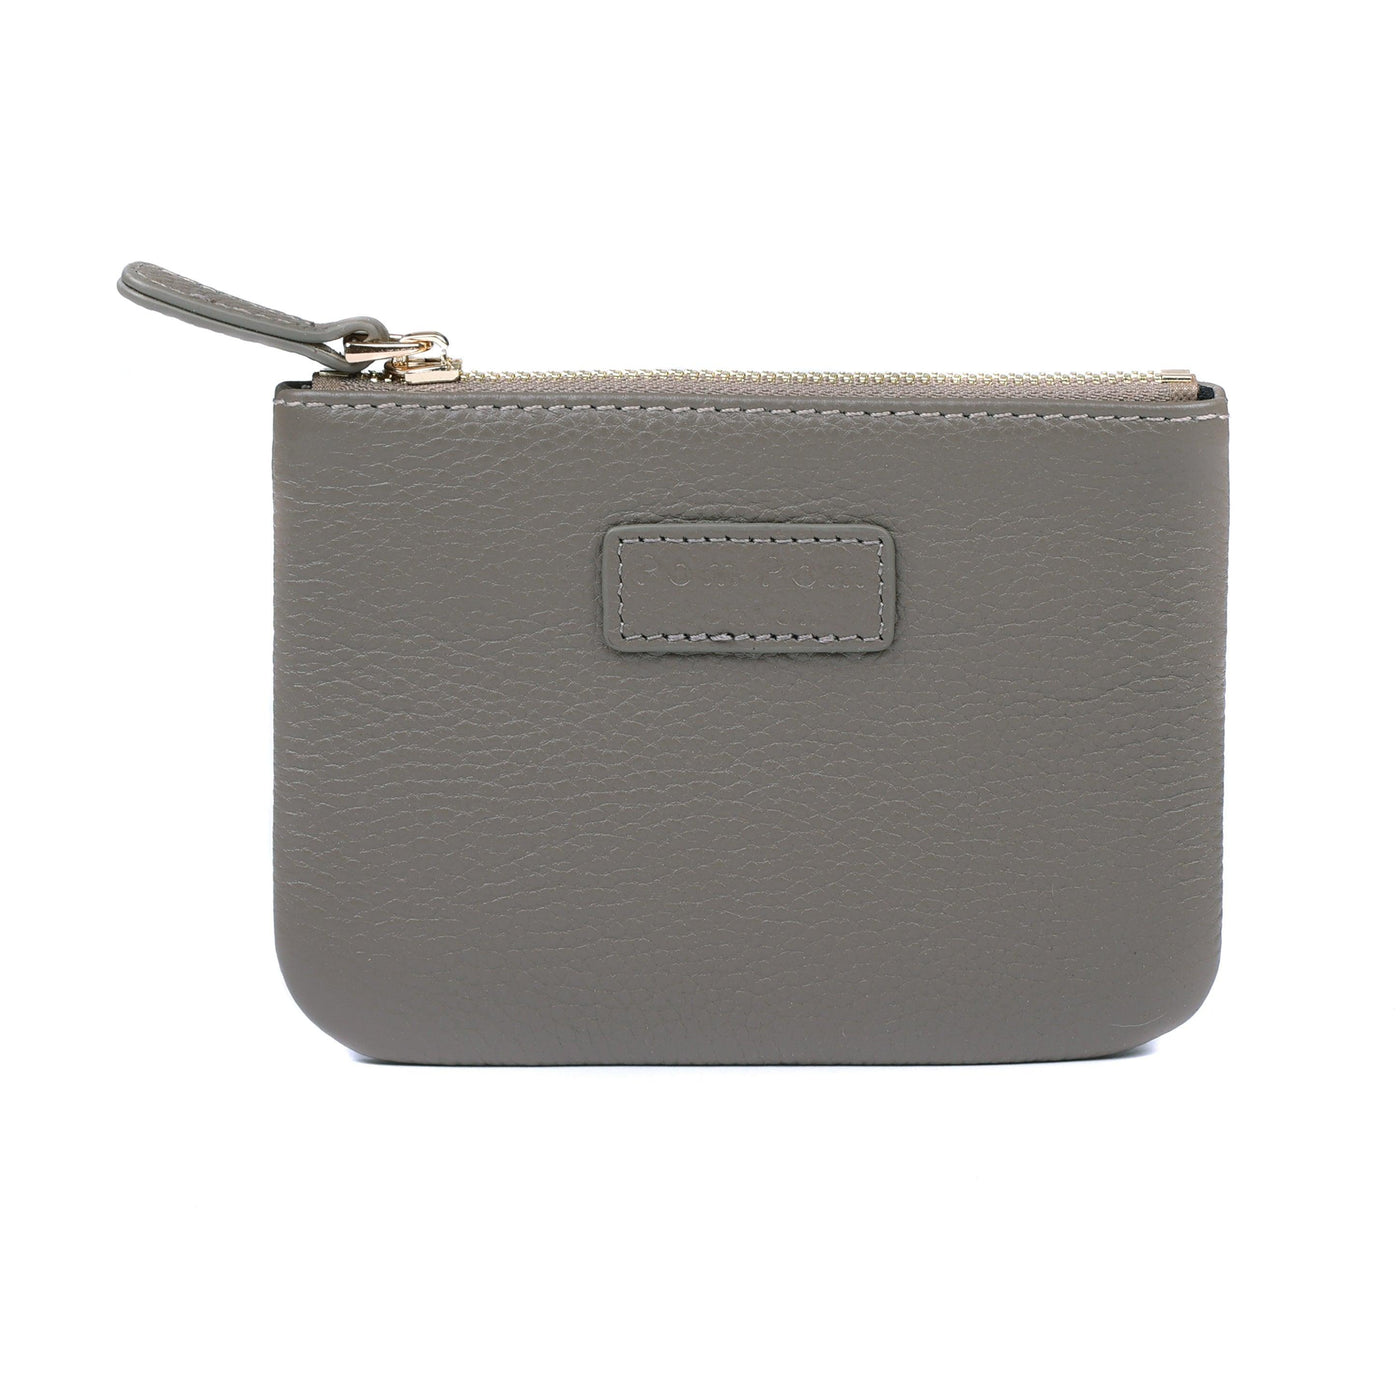 Chelsea Coin Purse Taupe - Pom Pom London